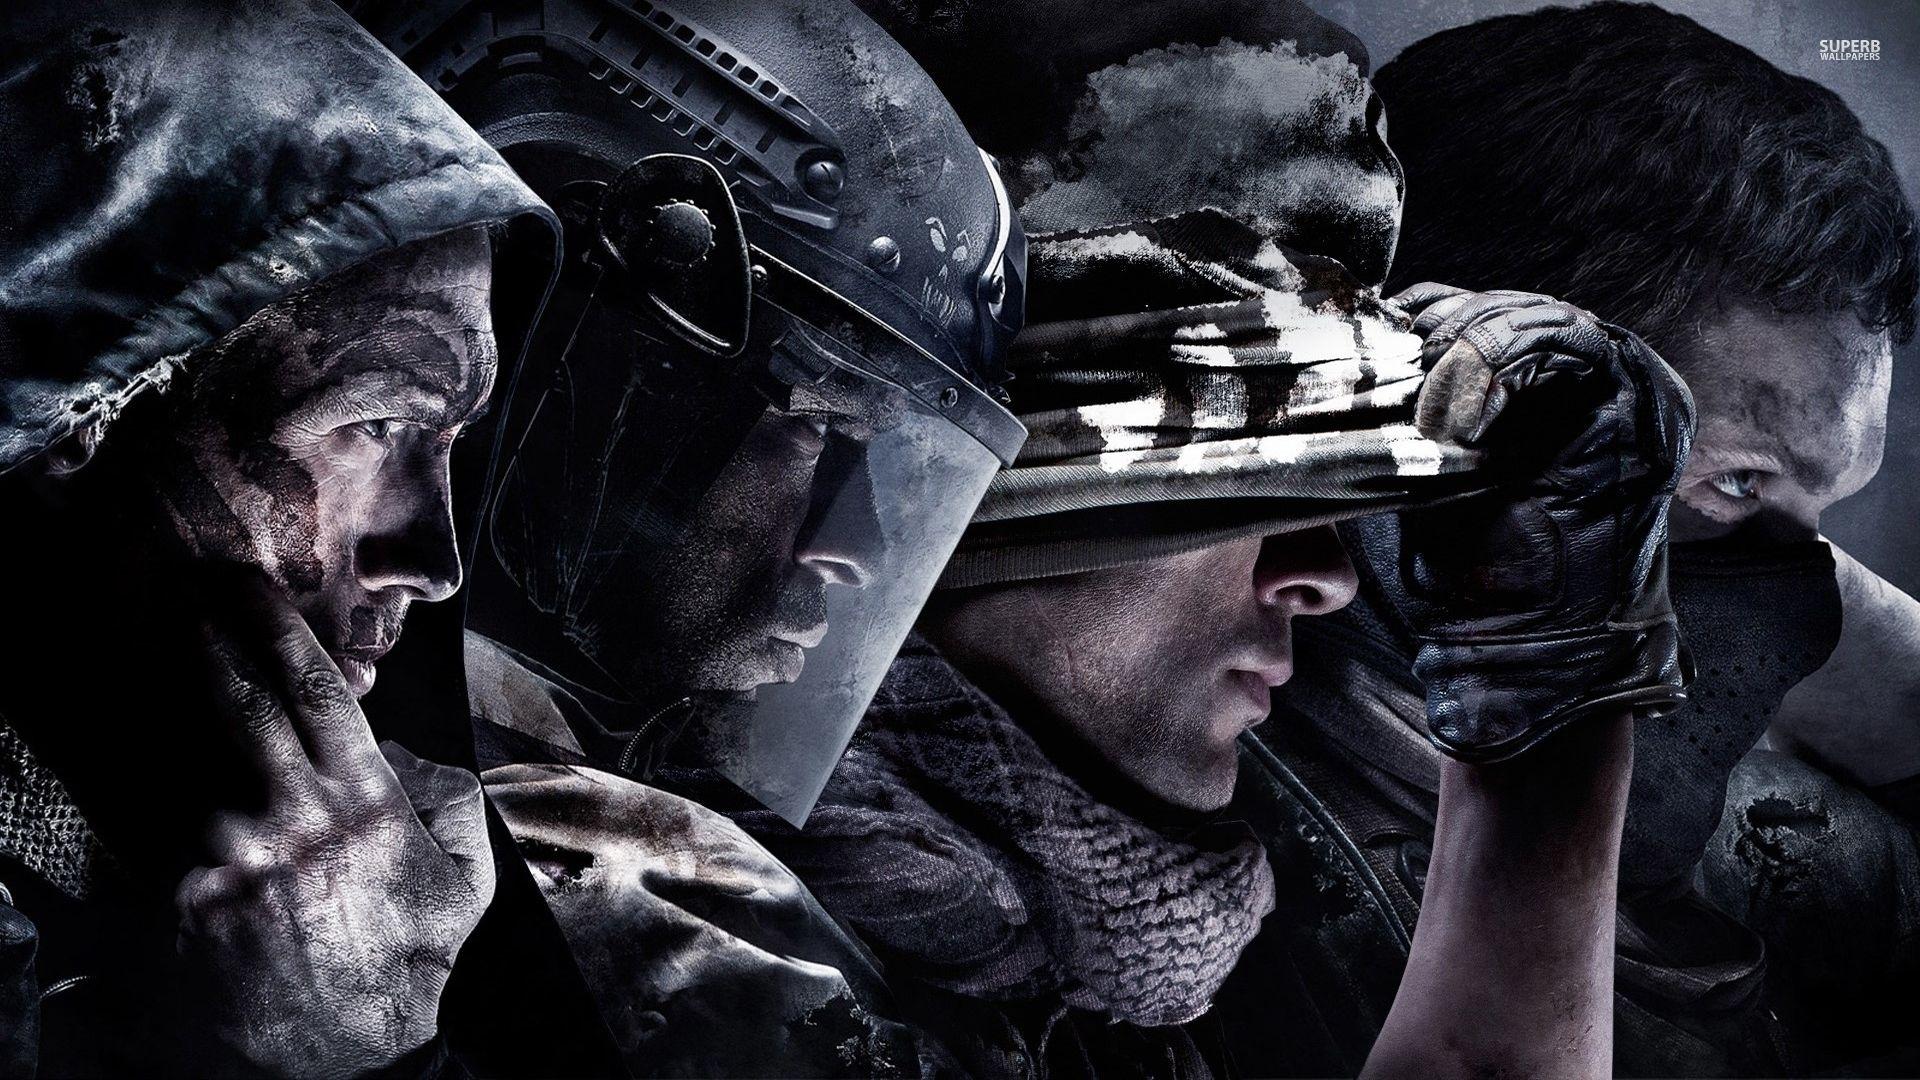 Call Of Duty Ghosts Wallpaper 1920x1080 WALLPAPER GAME HD